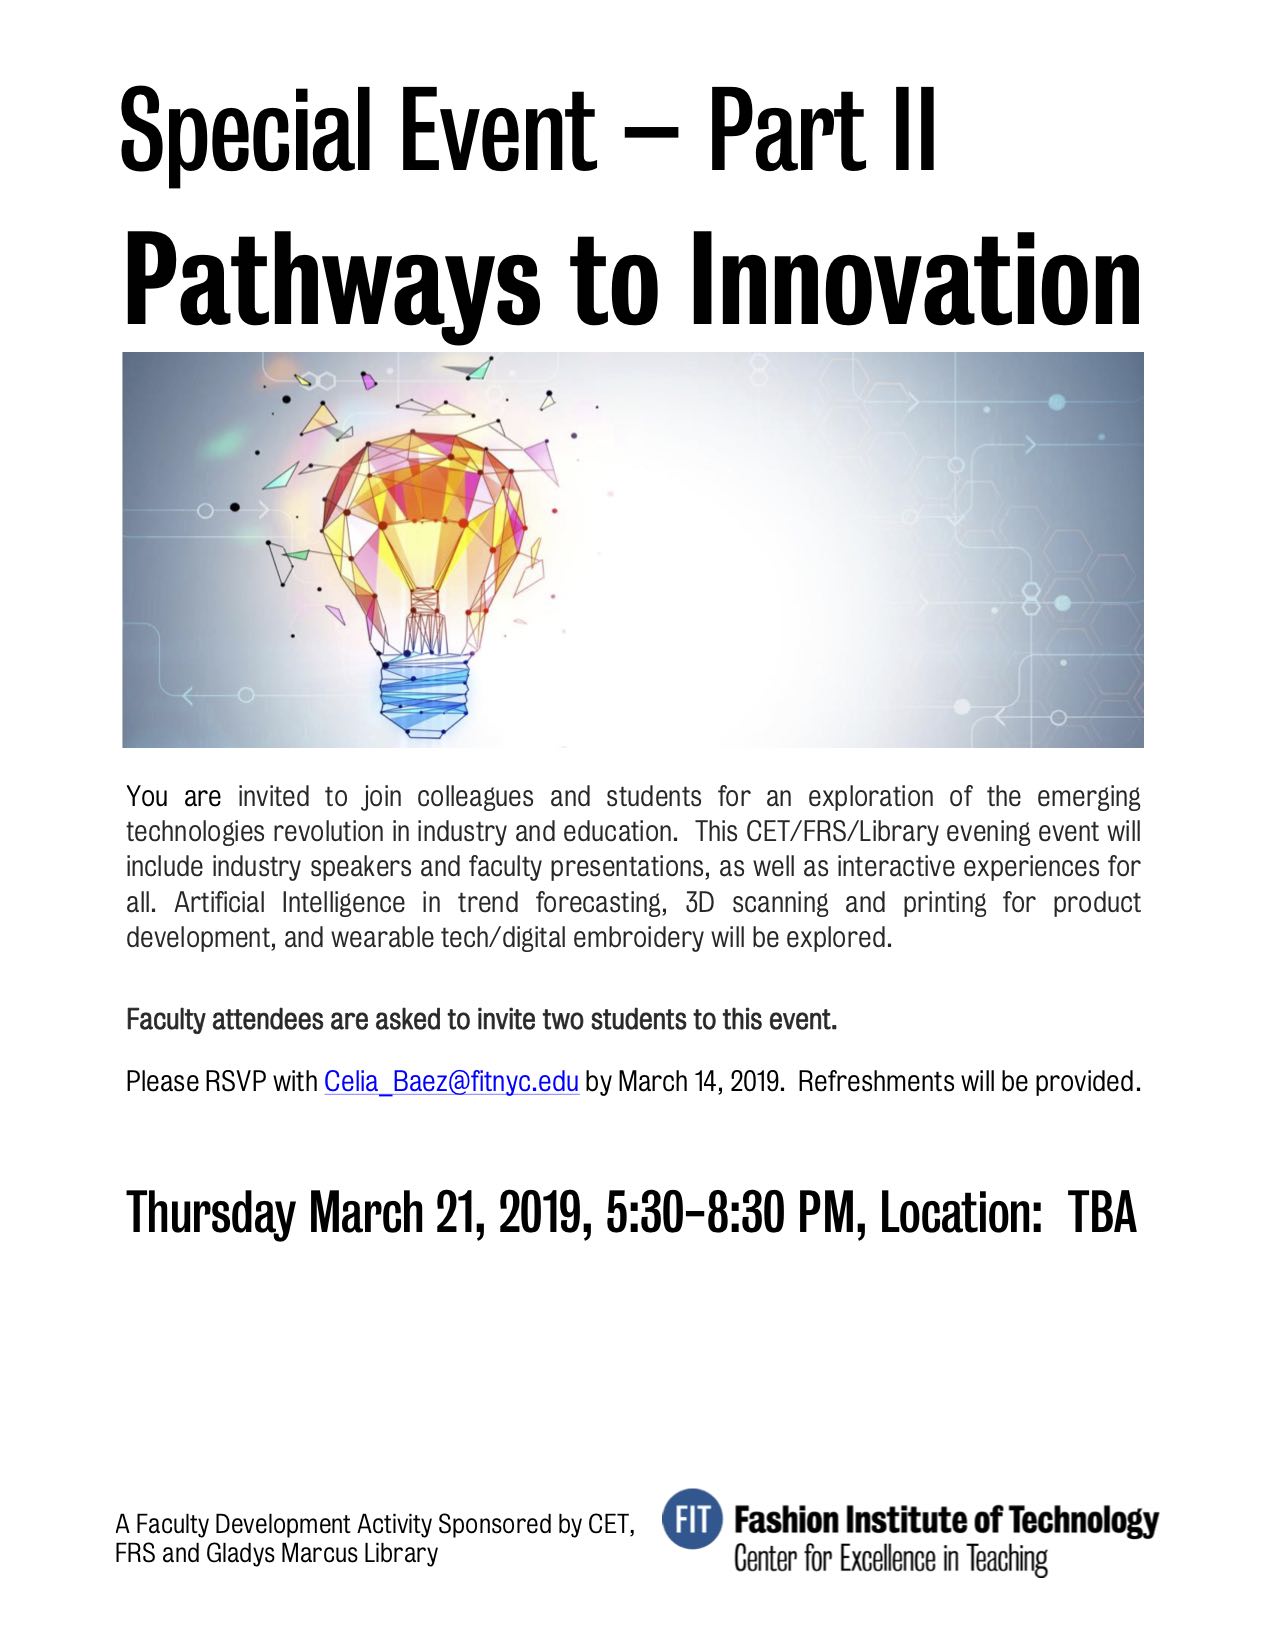 pathway to innovation poster II